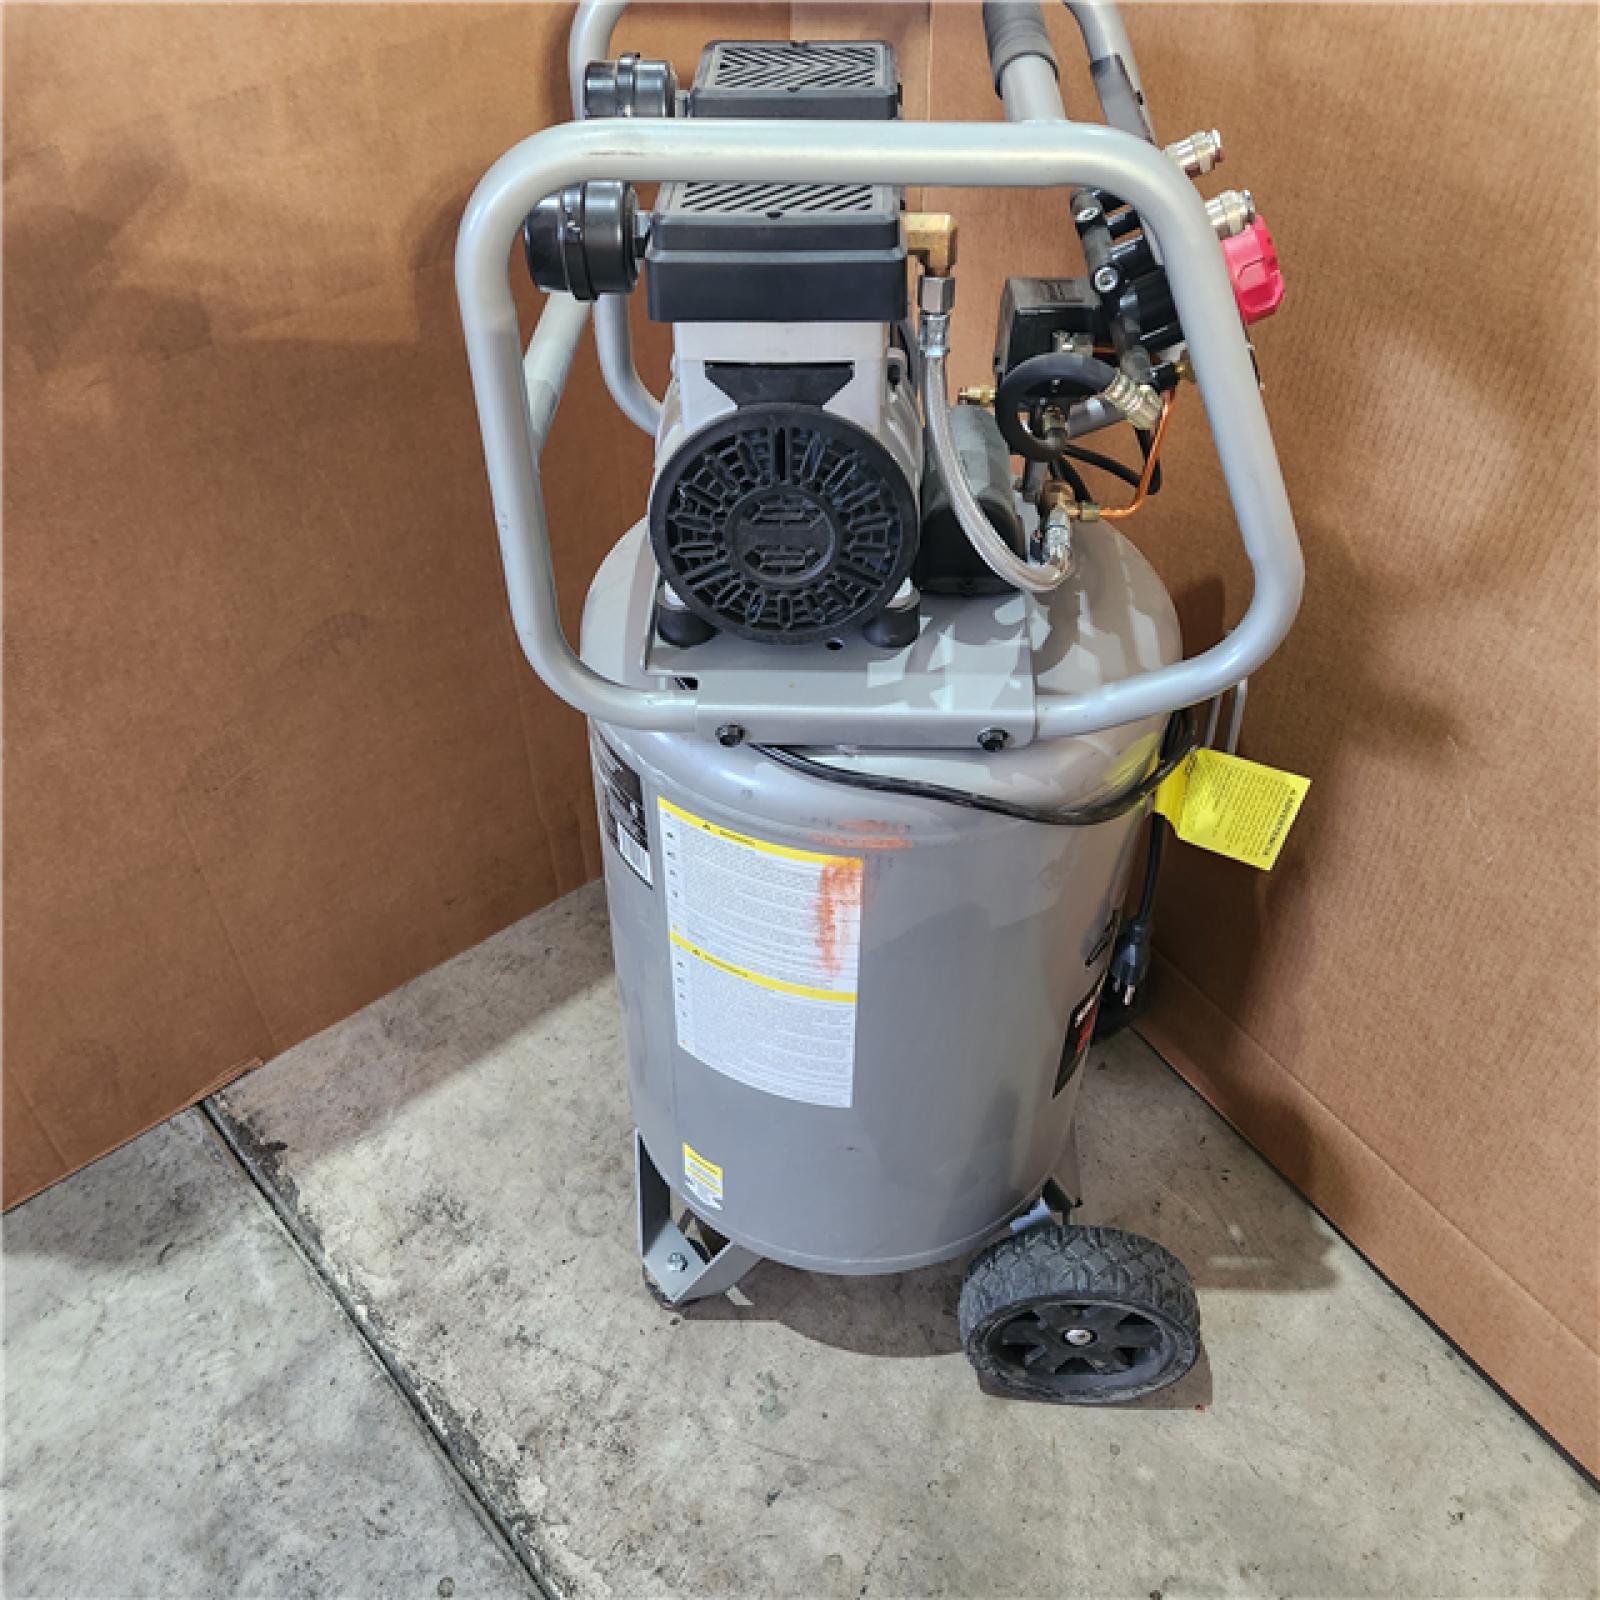 HOUSTON Location-AS-IS-Husky 20 Gal. Vertical Electric-Powered Silent Air Compressor APPEARS IN LIKE NEW Condition